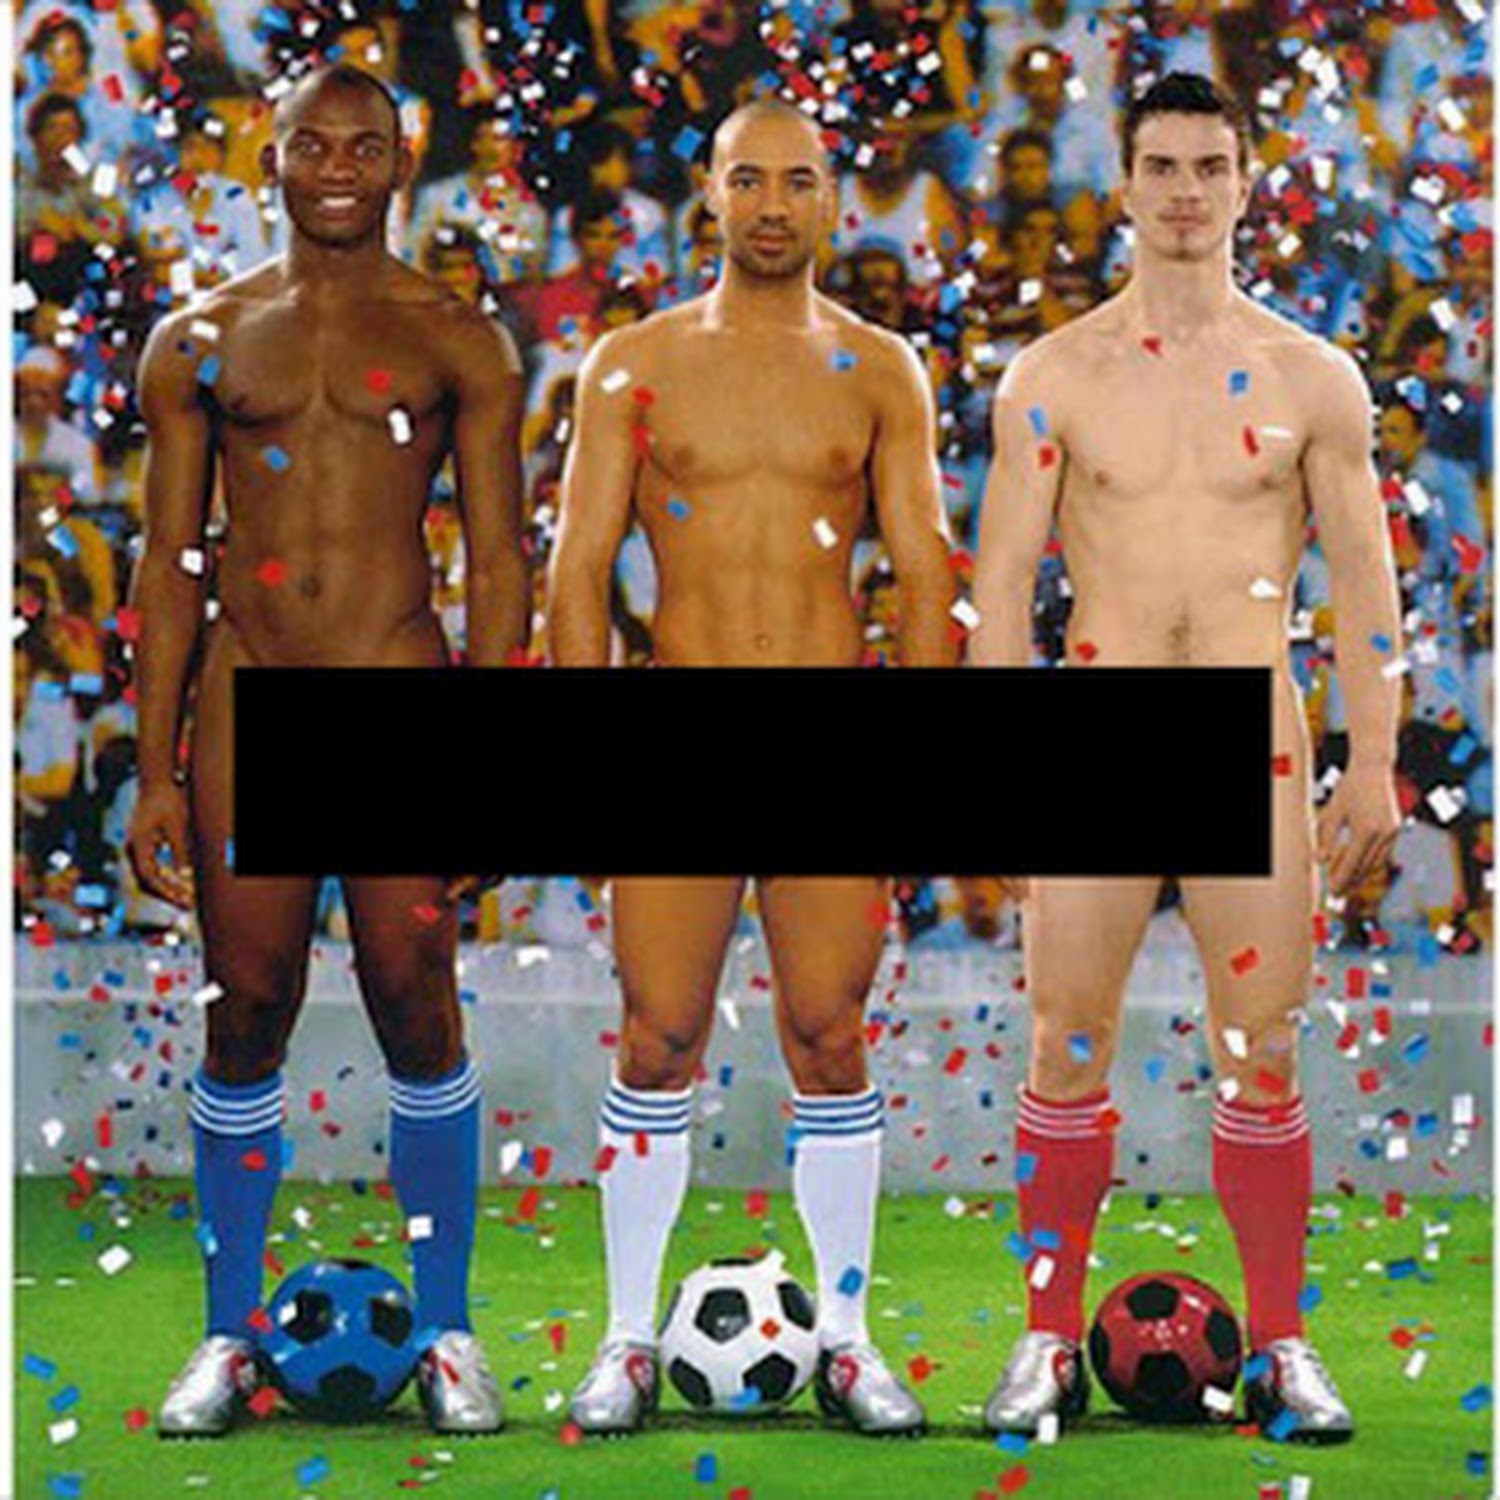 male soccer players nude